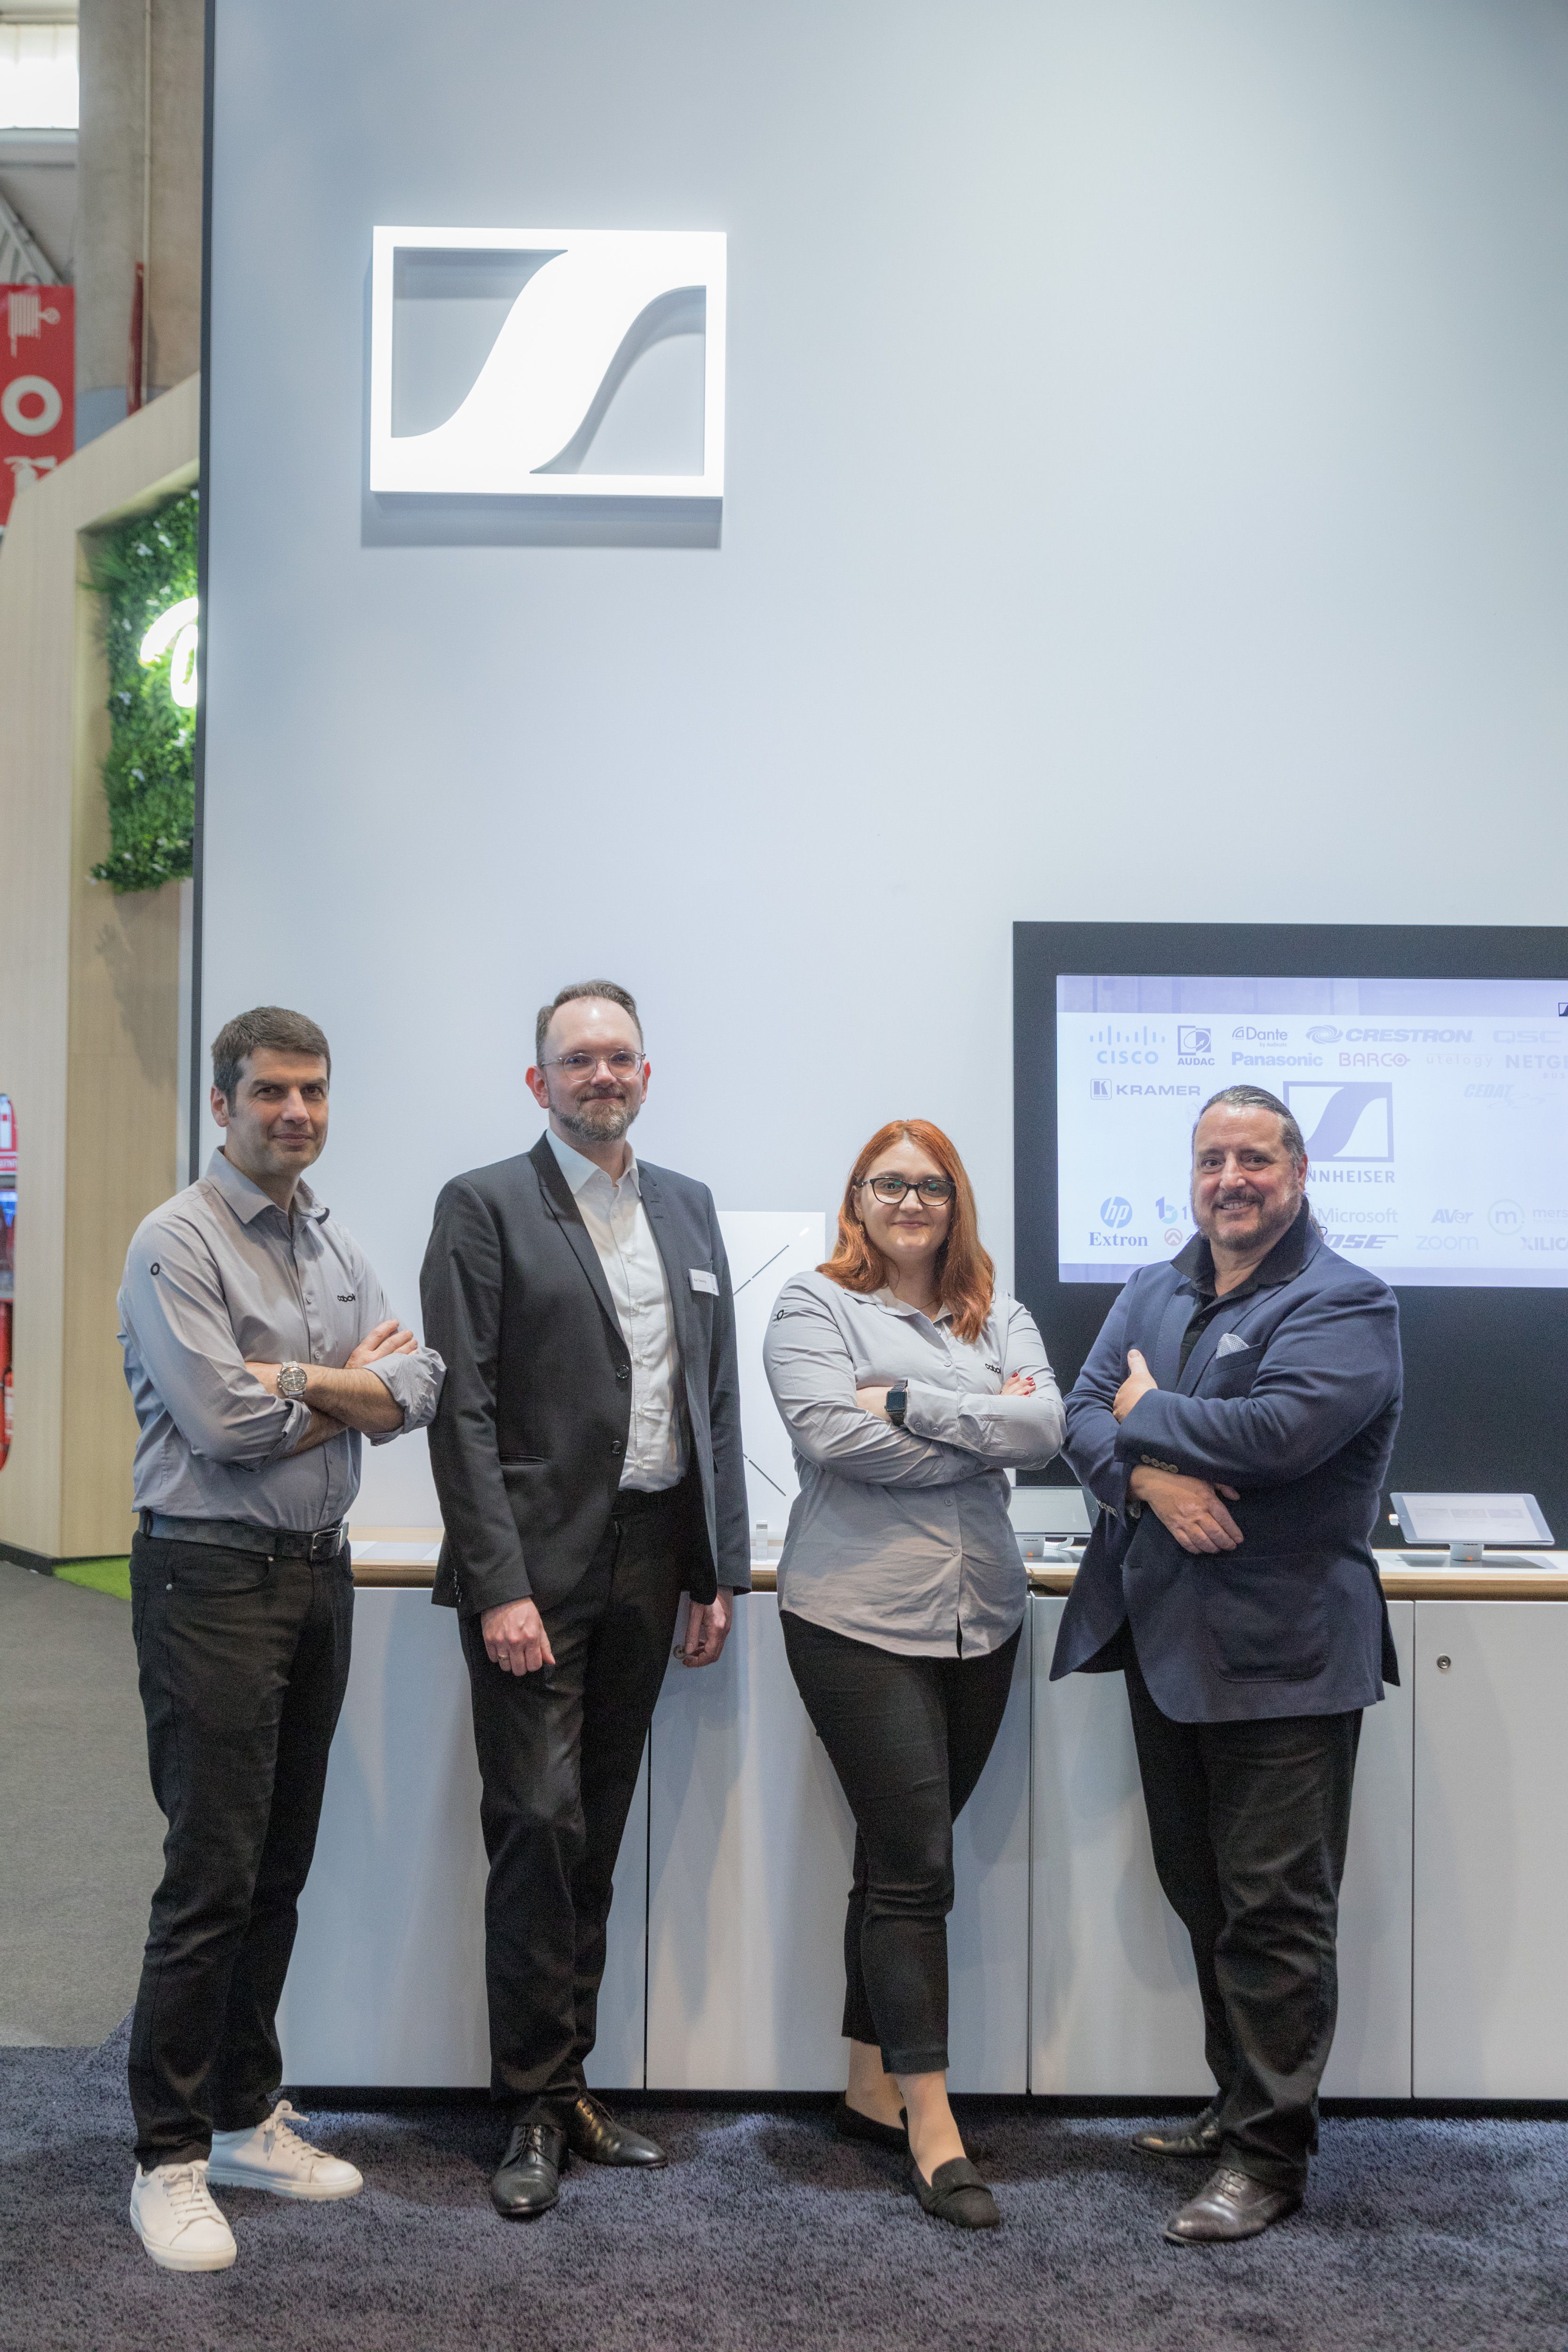 From left to right: Enrico Giannotti [Managing Director, CEDAT85], Kai Tossing [Head of Product Management Business Communication at Sennheiser], Selena Gray [Marketing Director, CEDAT85], Stefano Aldrovandi [Head of International Operations, CEDAT85]